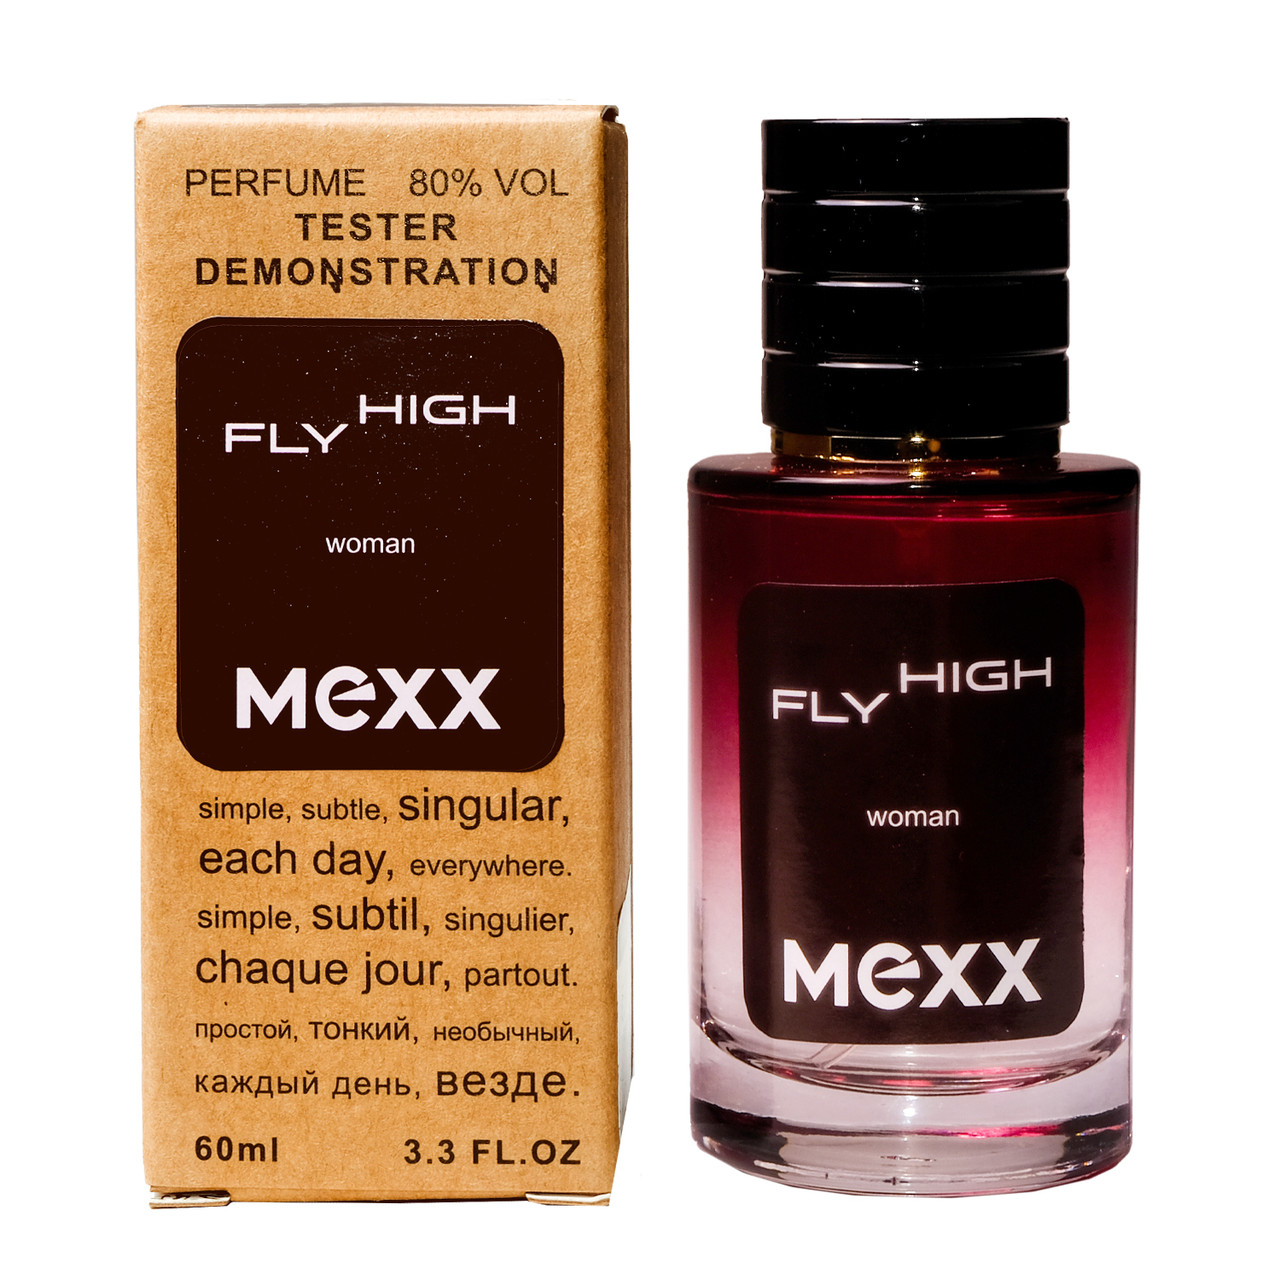 Mexx Fly High TESTER LUX, 60 мл